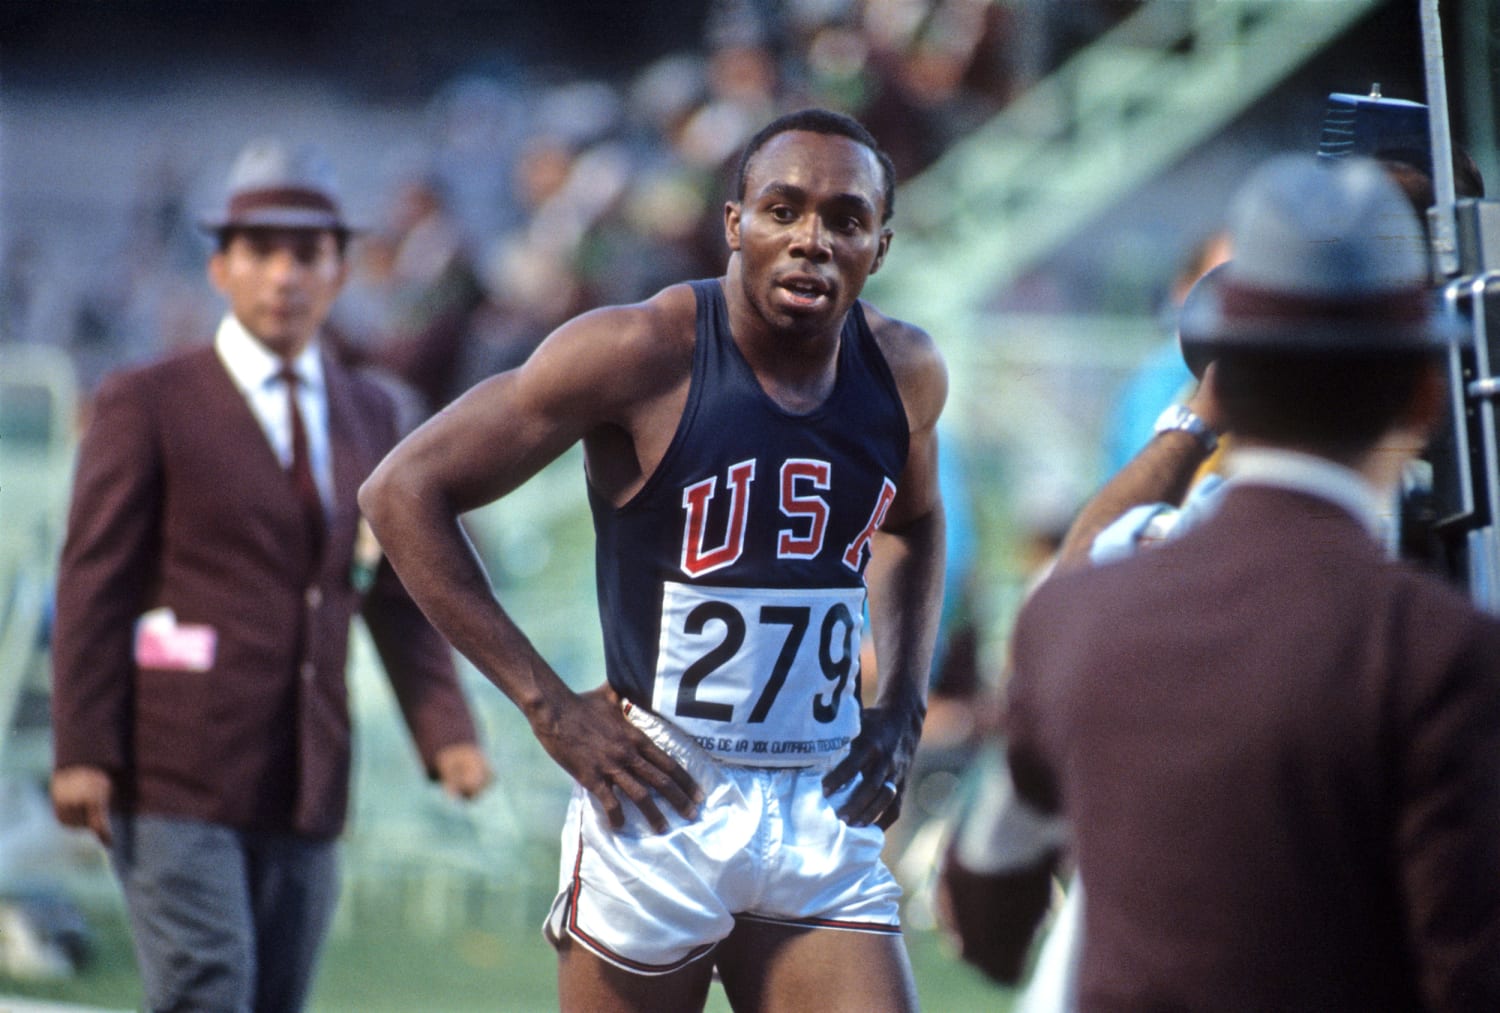 Jim Hines, 1968 Olympic 100-meter champion and NFL wide receiver, dies at 76